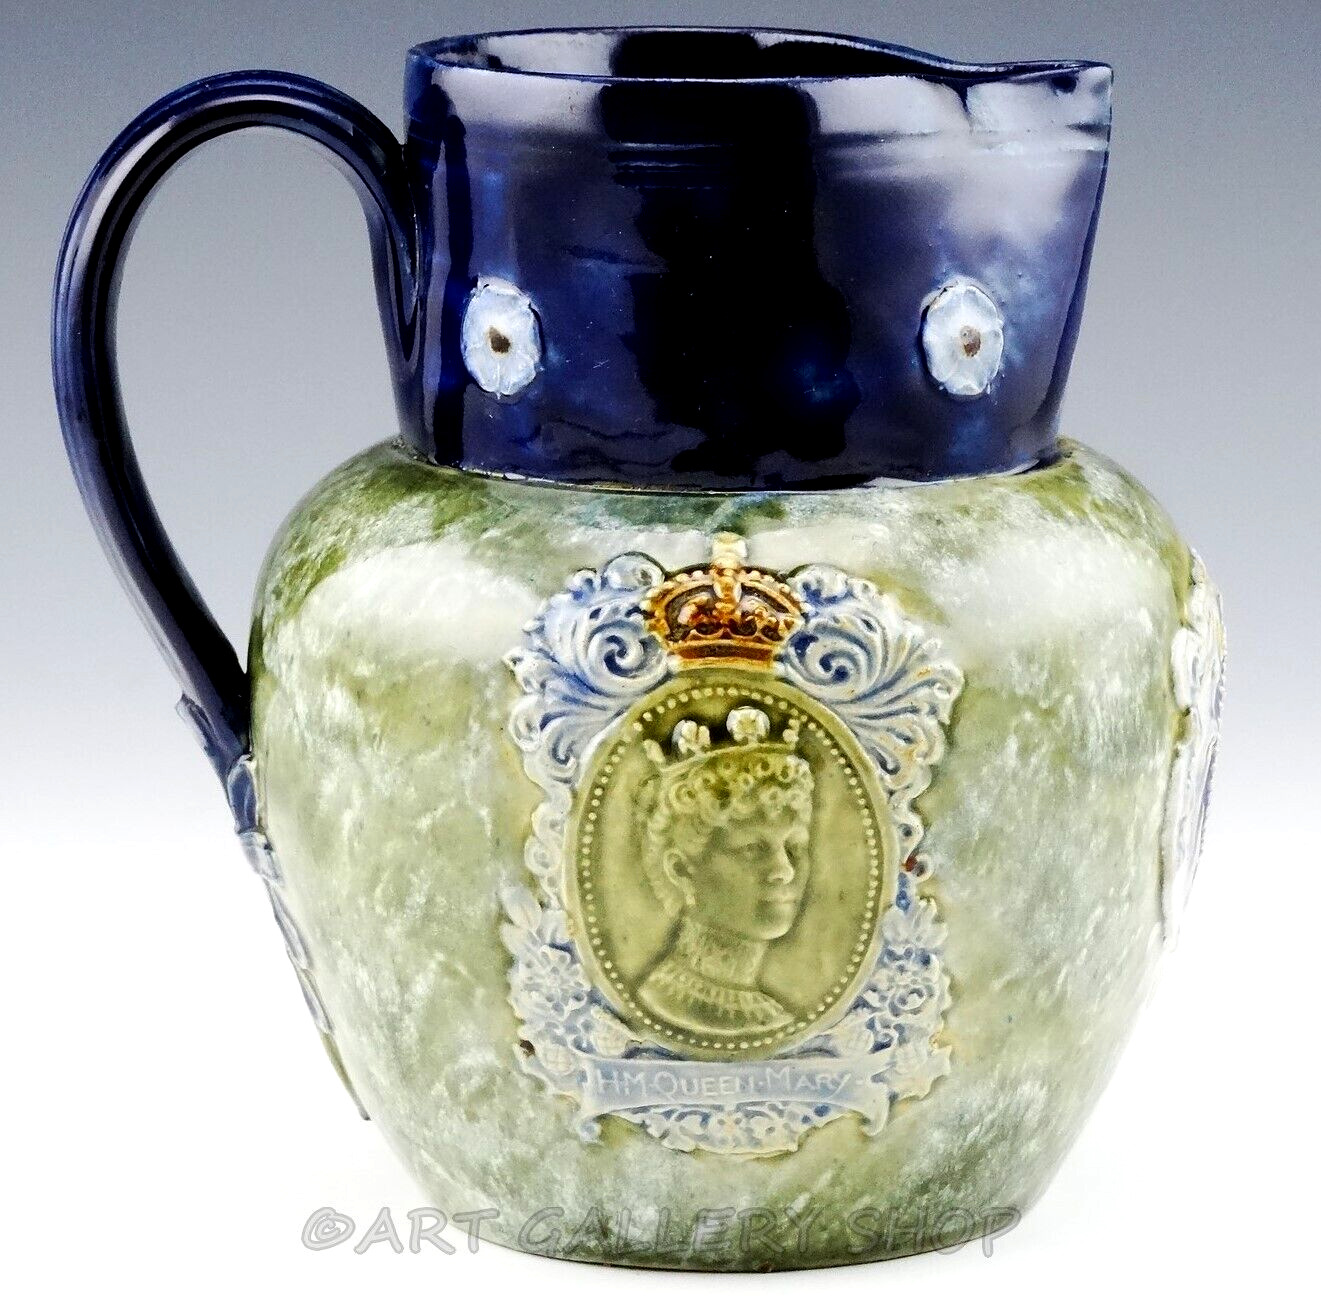 Antique Royal Doulton STONEWARE PITCHER KING GEORGE V QUEEN MARY CORONATION 1911